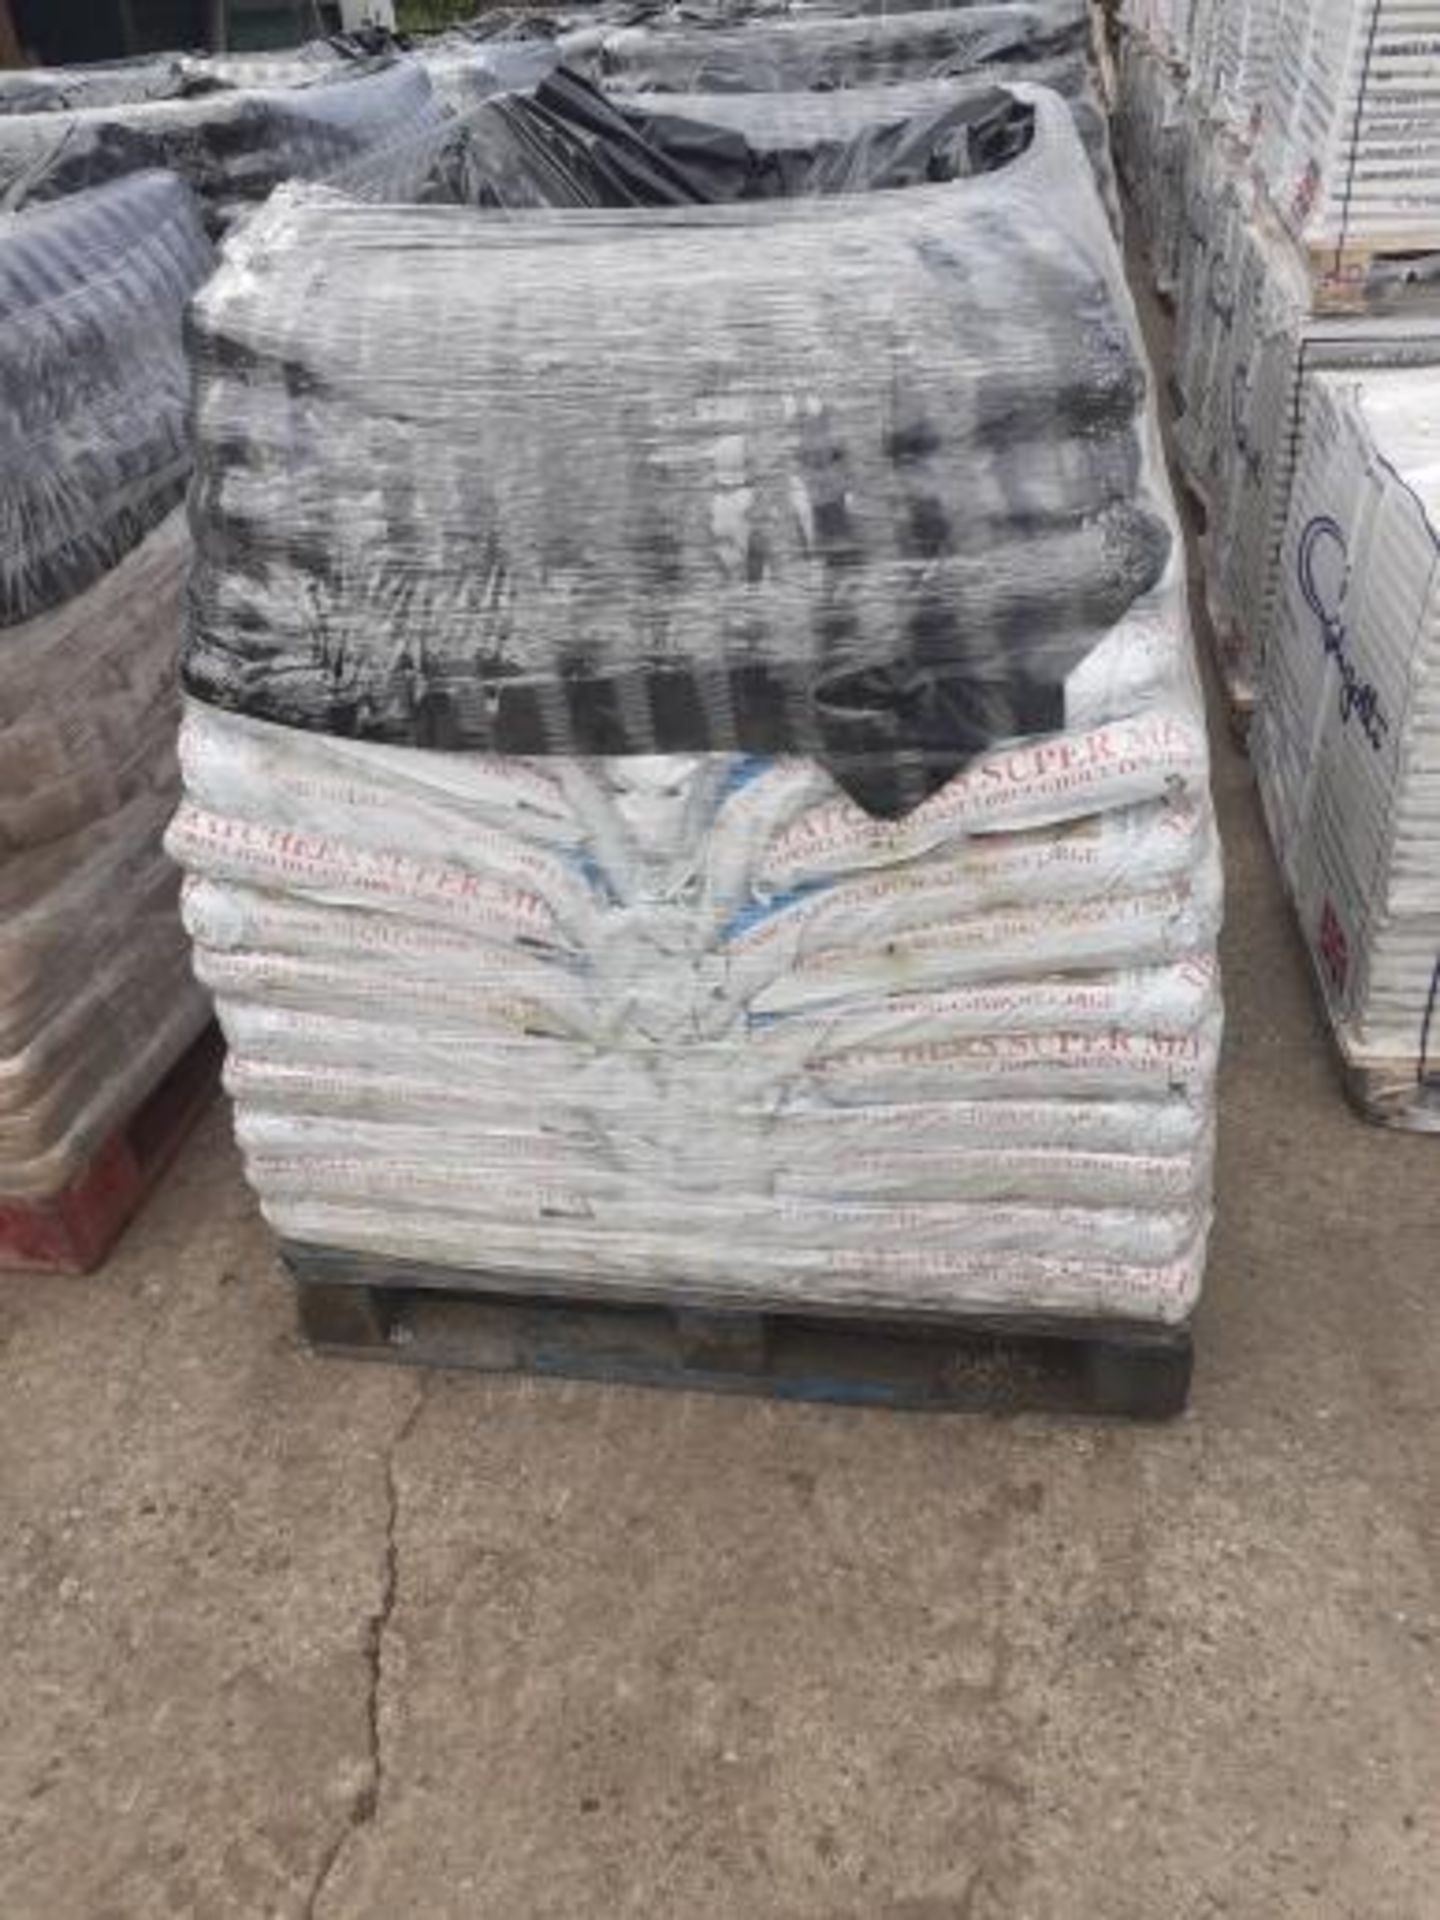 1 PALLET OF TOP GRADE COMPOST, EACH BAG CONTAINS 40 LITRES, 75 BAGS PER PALLET, APPROX WEIGHT 800kg - Image 2 of 4